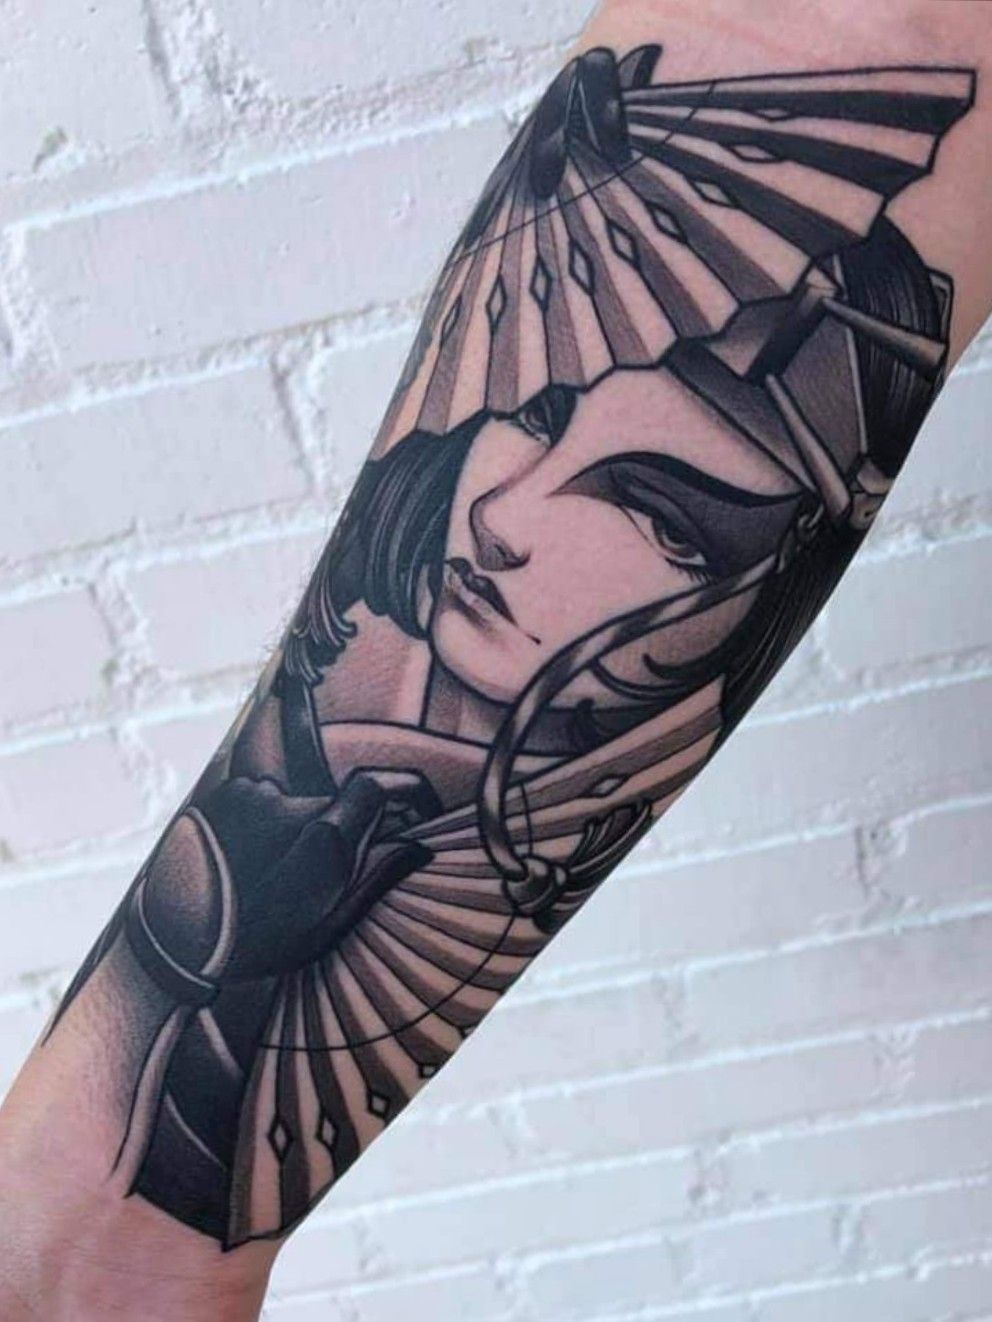 101 Amazing Avatar The Last Airbender Tattoo Ideas You Need To See   Outsons  Mens Fashion Tips And Style Guides  Avatar tattoo Fandom  tattoos Atla tattoo